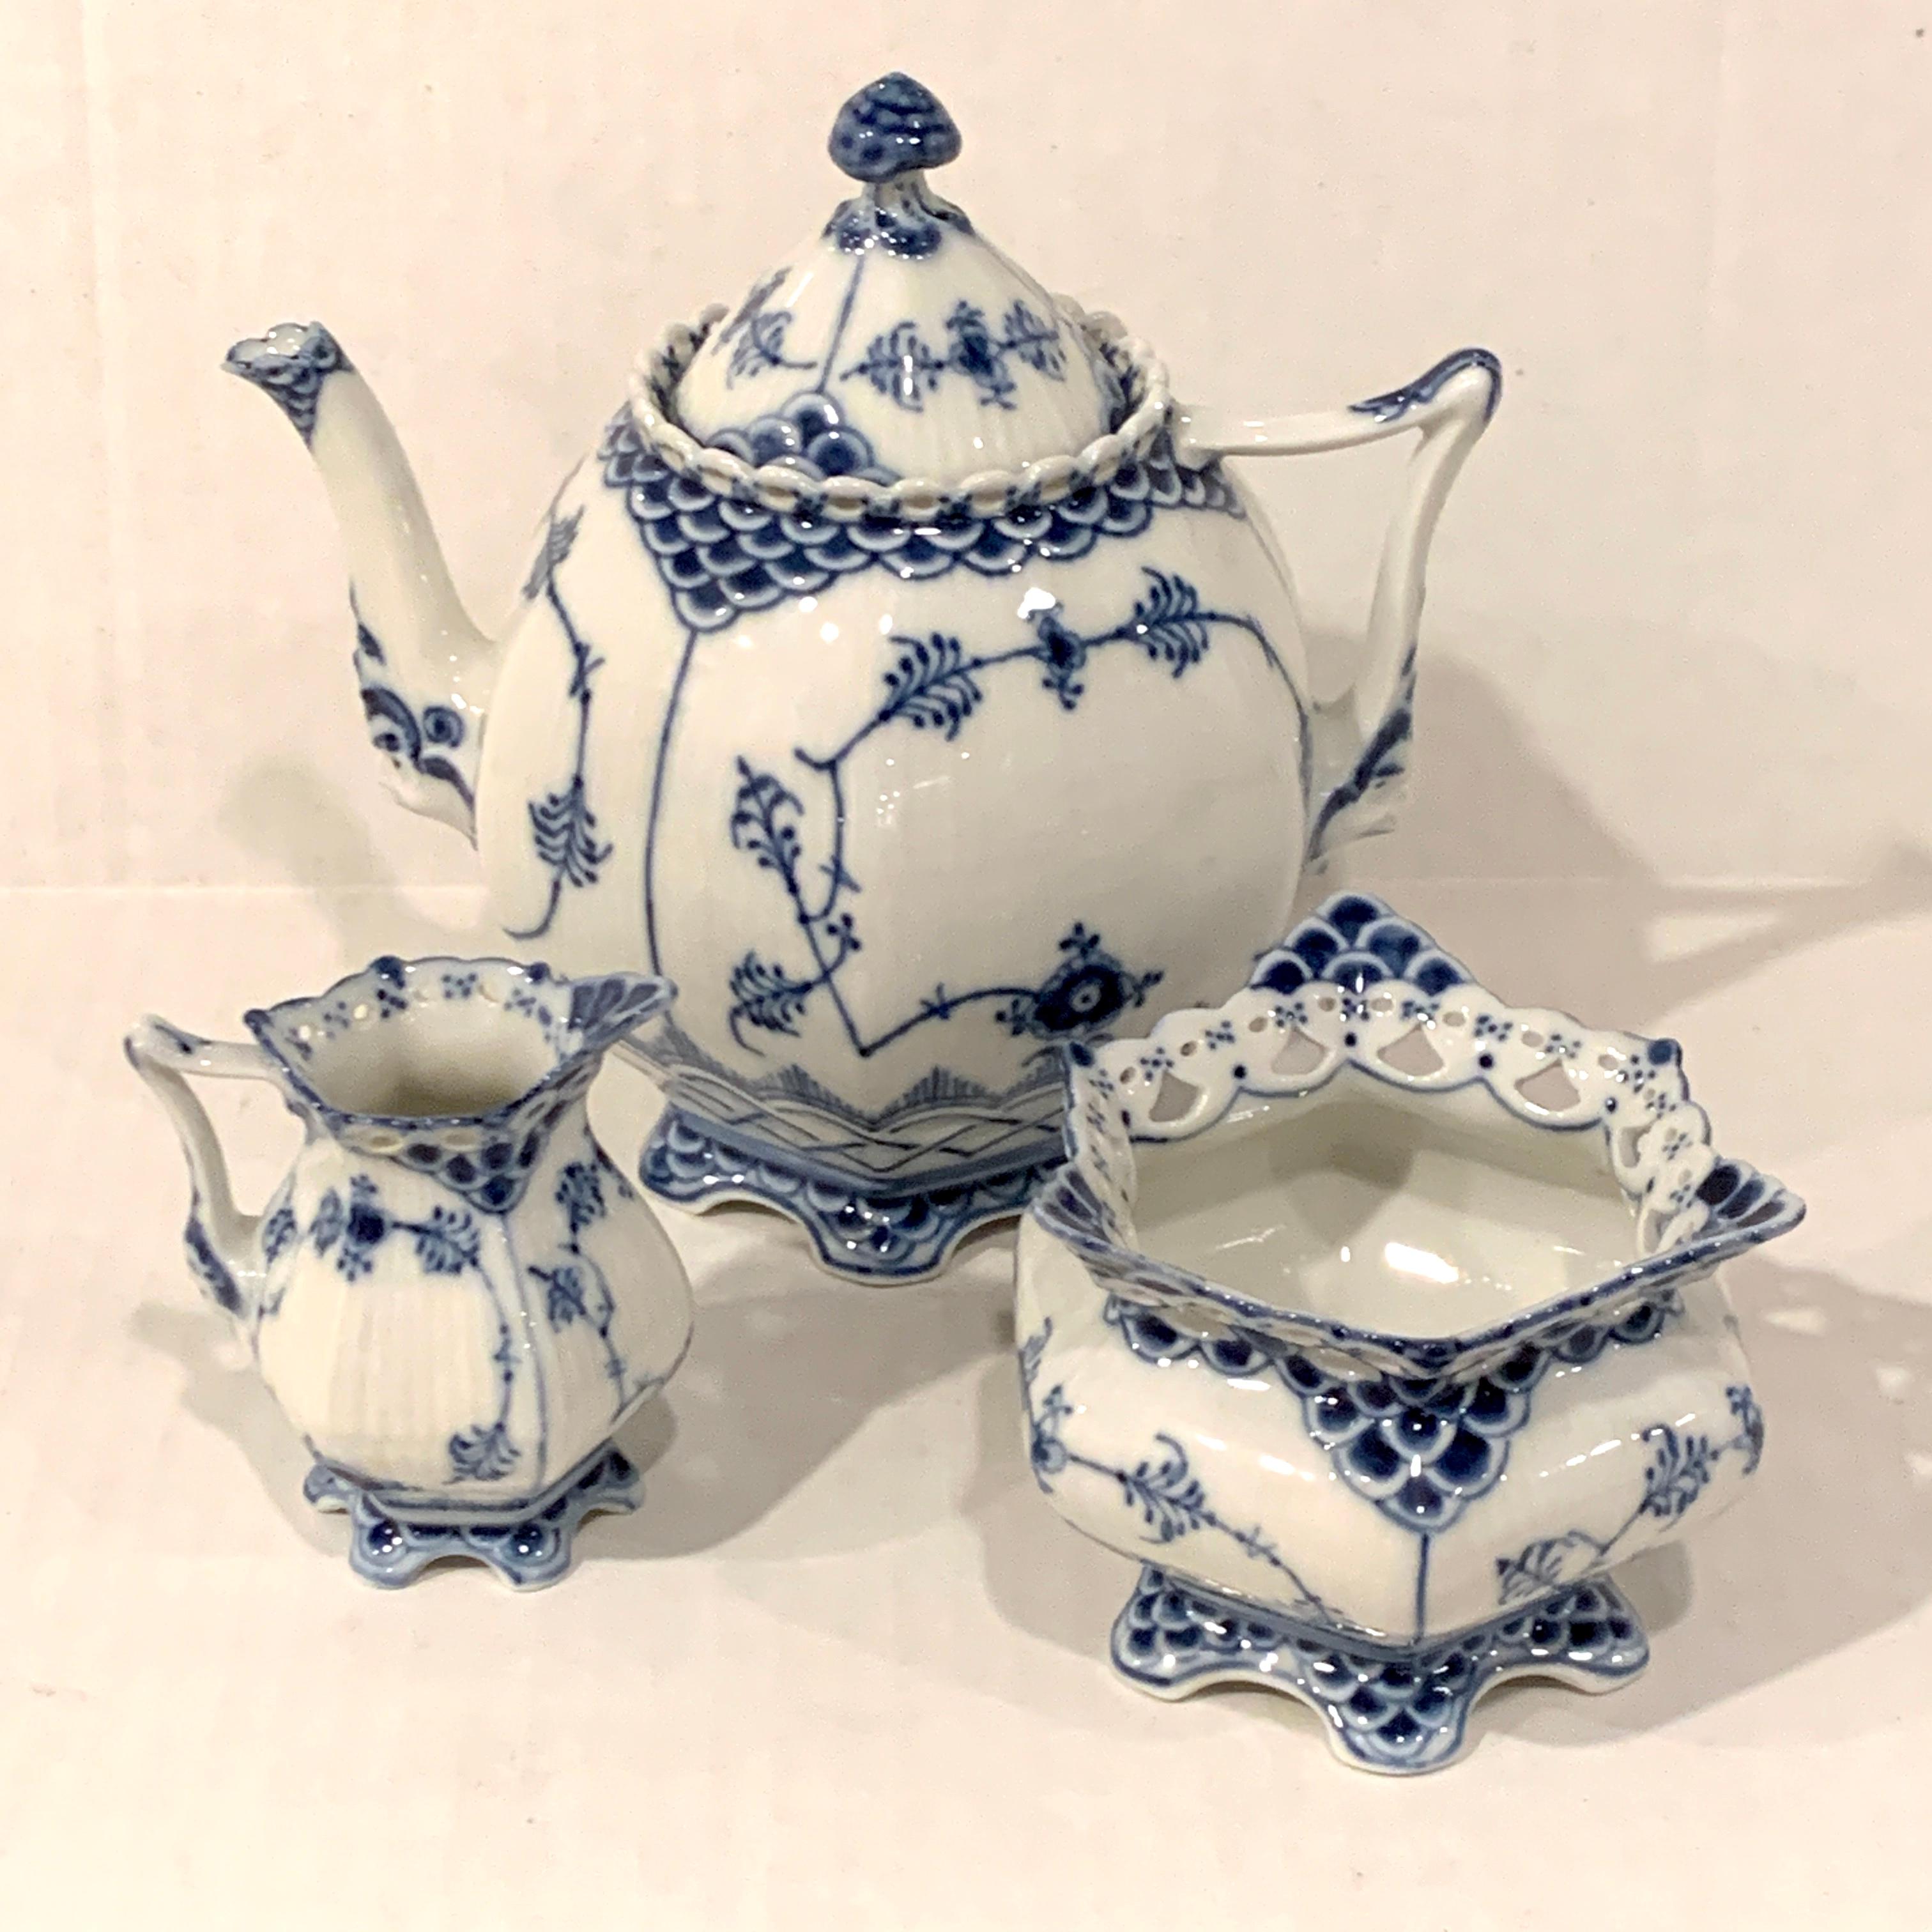 Royal Copenhagen Blue Fluted Full Lace Tea Set, Consisting of three pieces all in well cared for vintage condition, no chips, cracks or repairs 
Tea pot 5